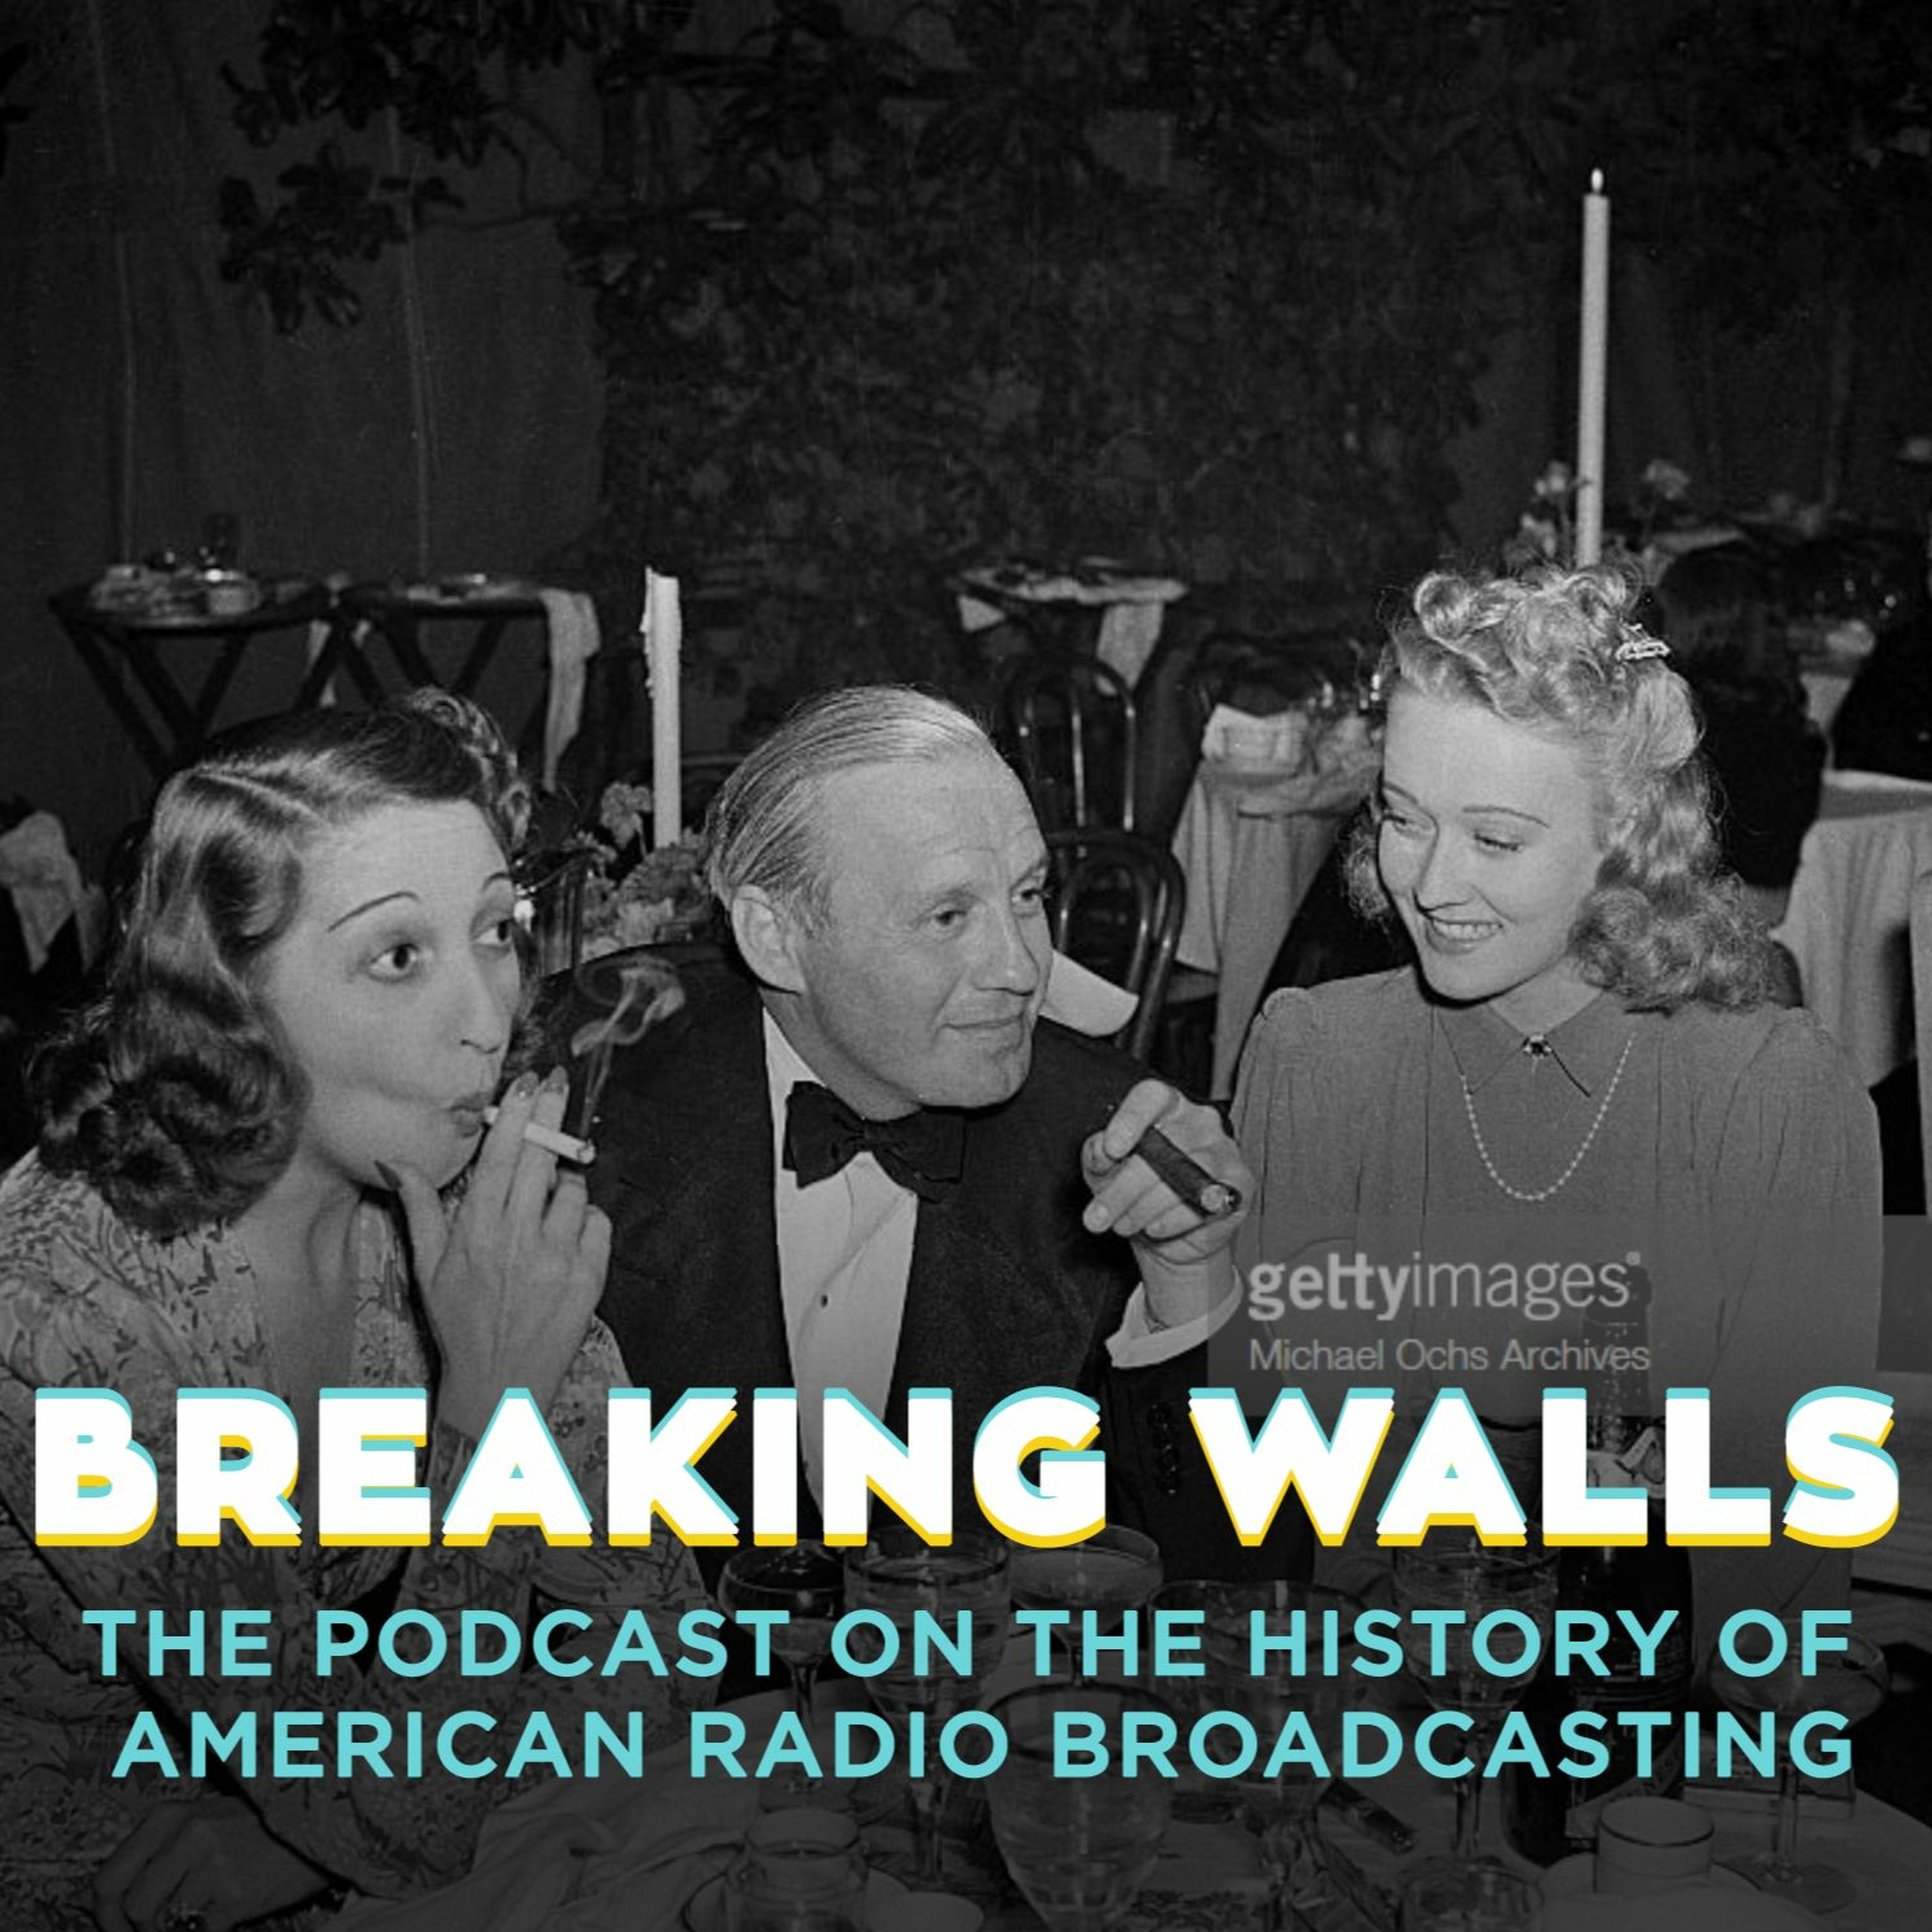 BW - EP151—001: Jack Benny’s Famous Slump—Benny’s 1930s Early Radio Career and Ratings Peak